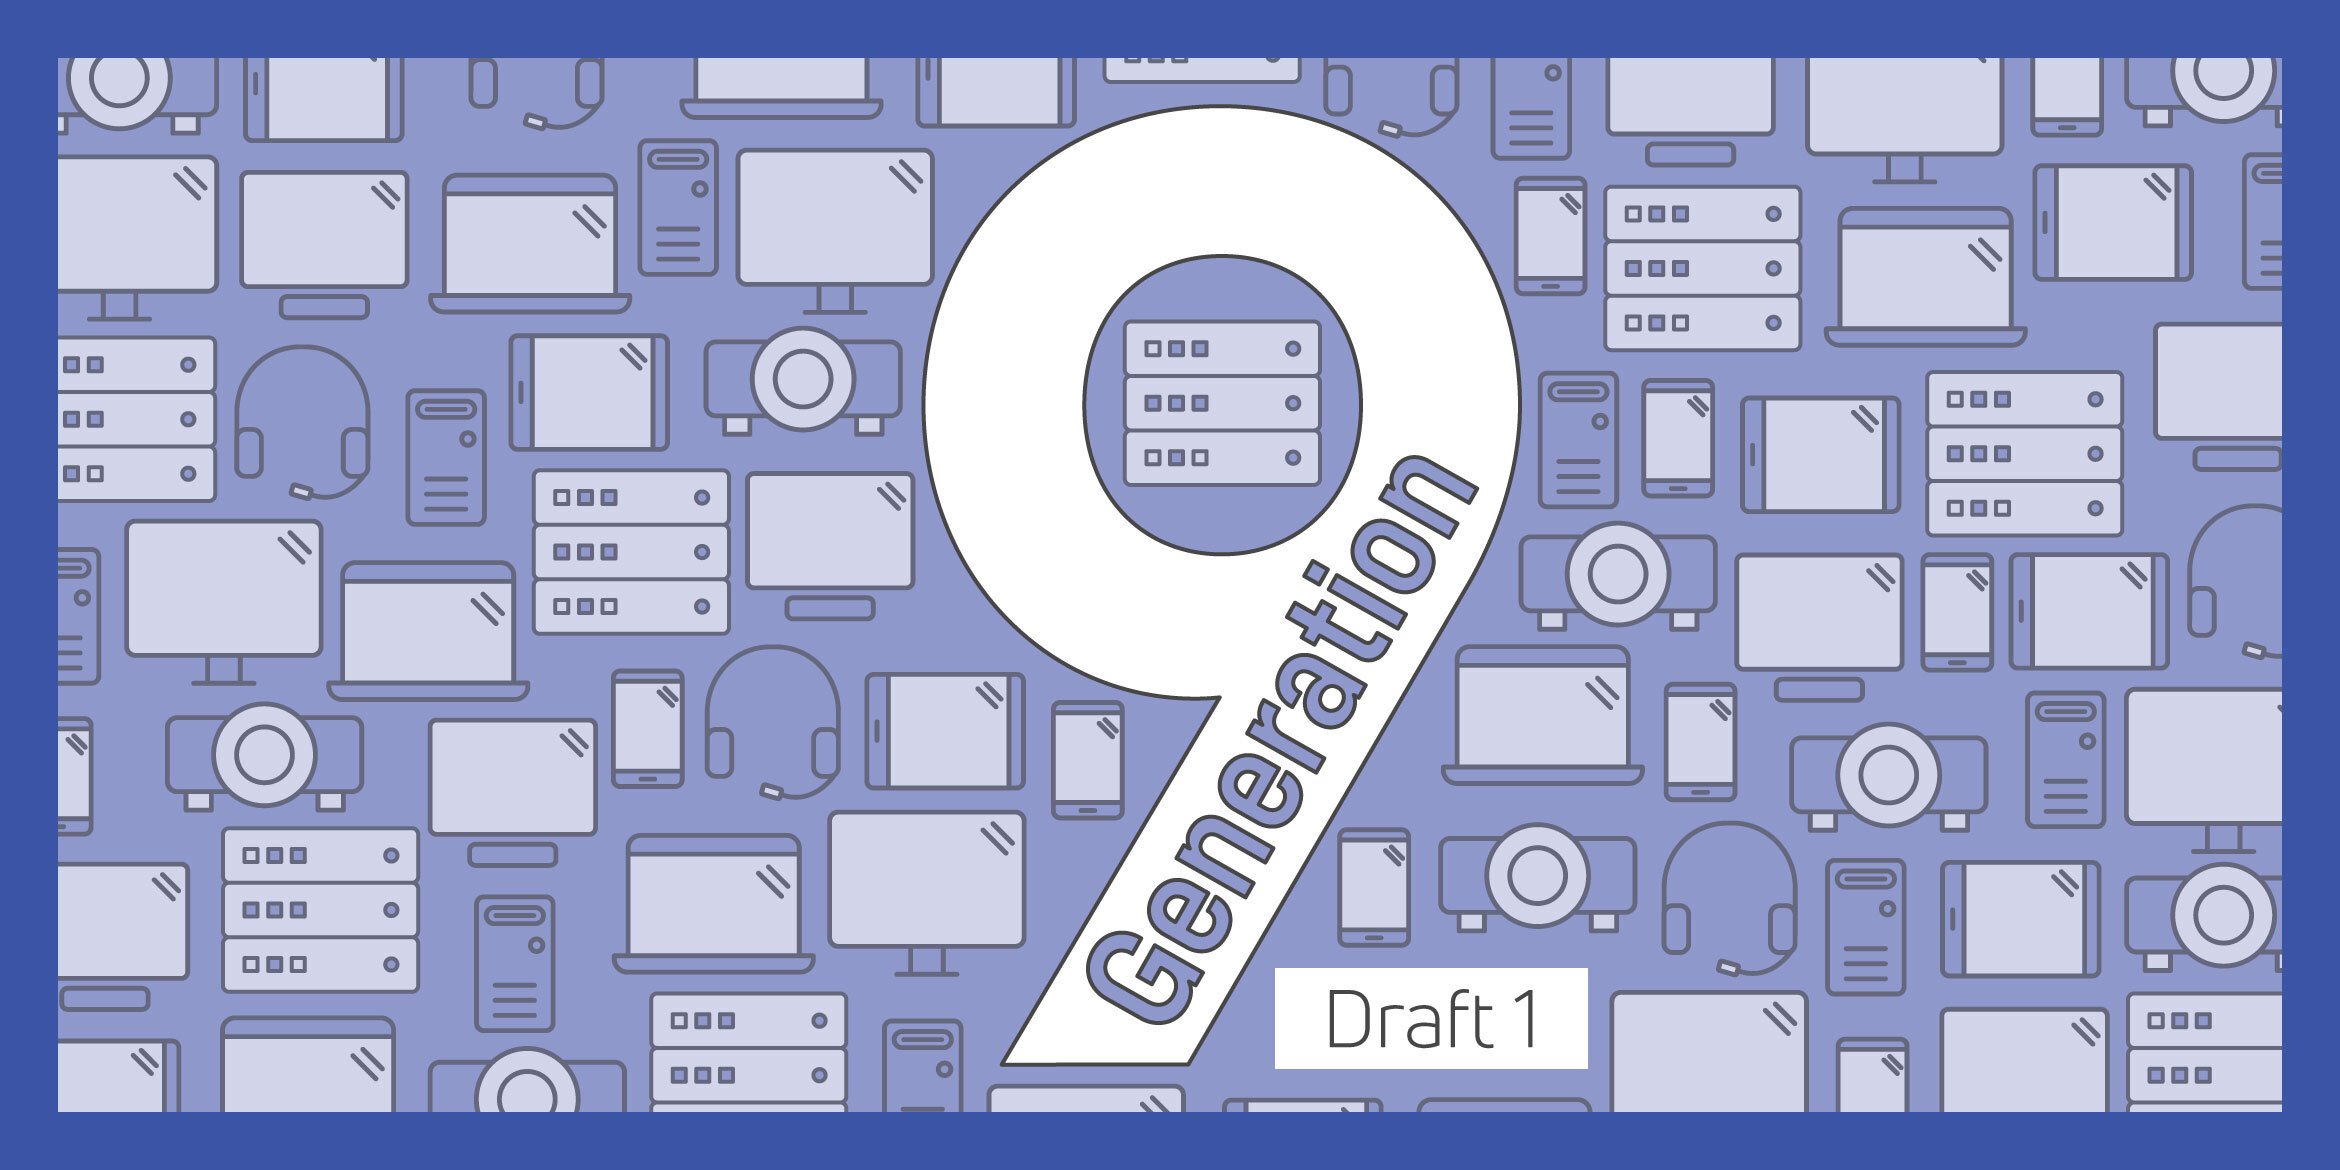 Get to know the first draft of TCO Certified, generation 9